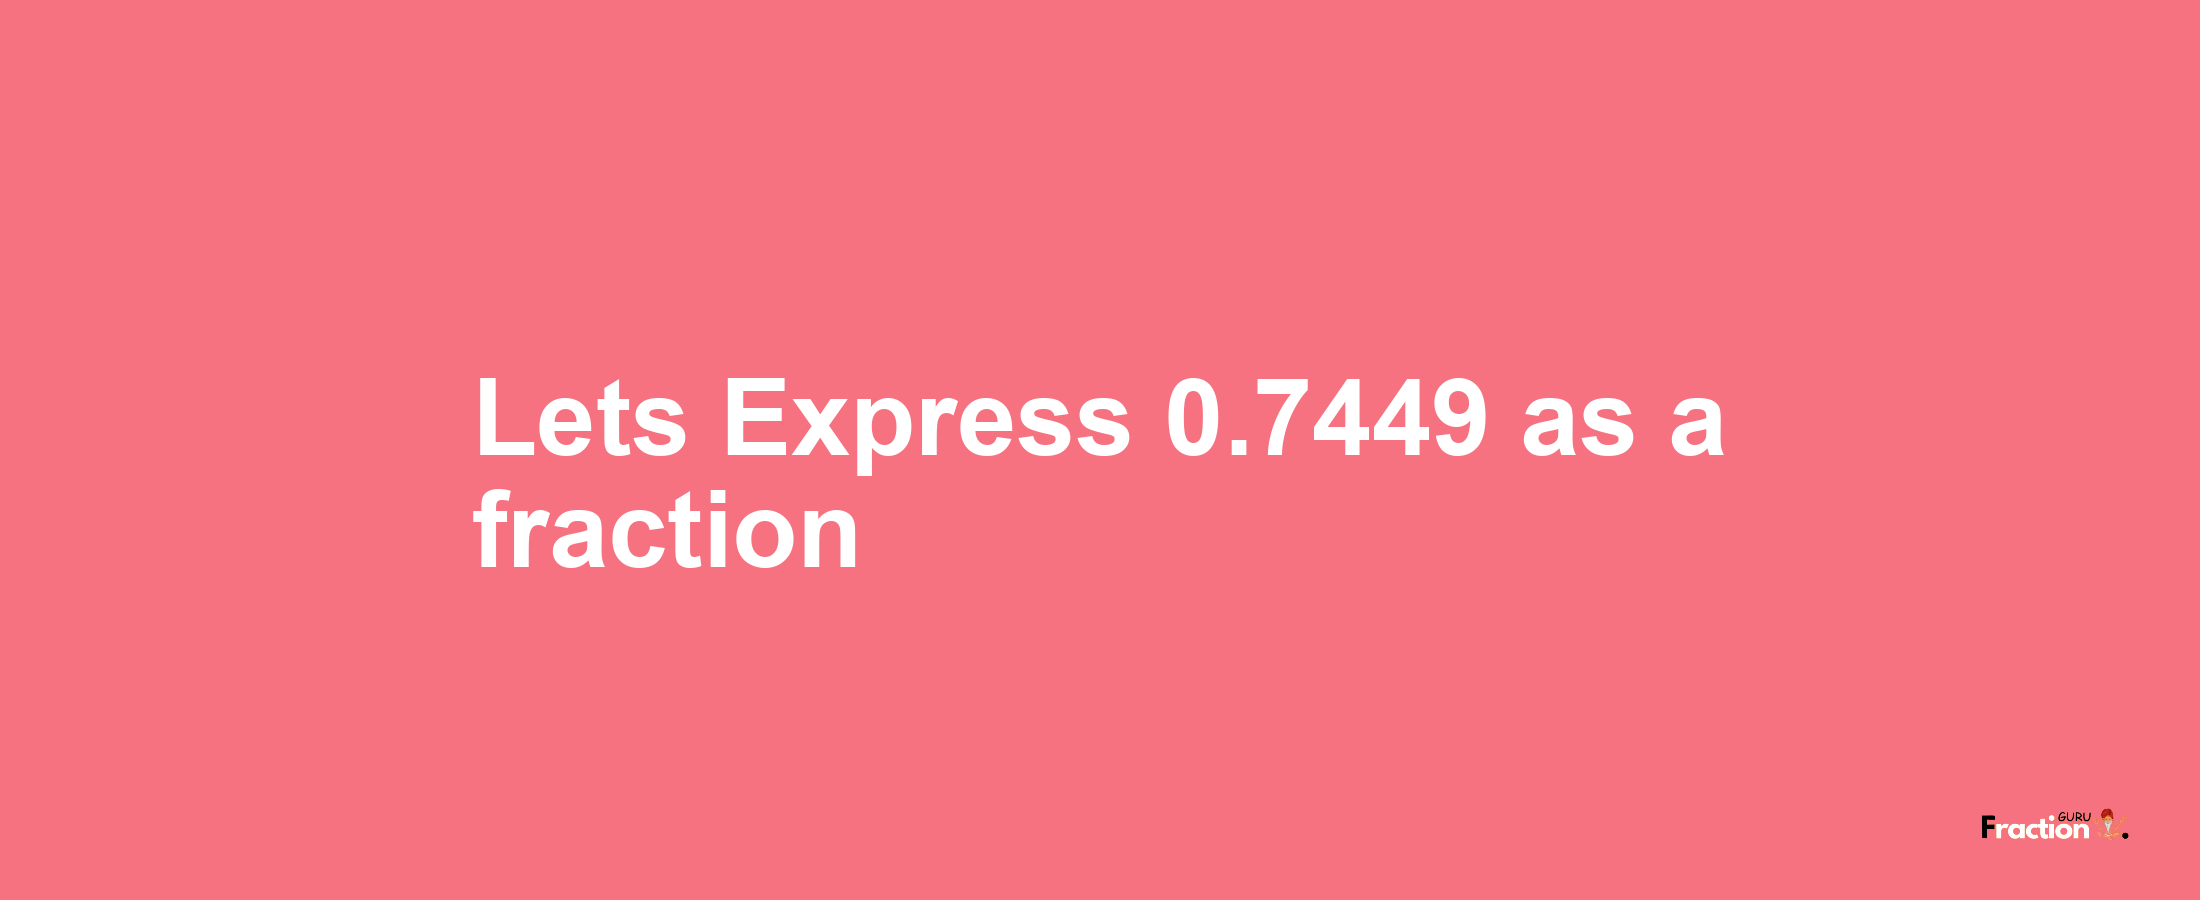 Lets Express 0.7449 as afraction